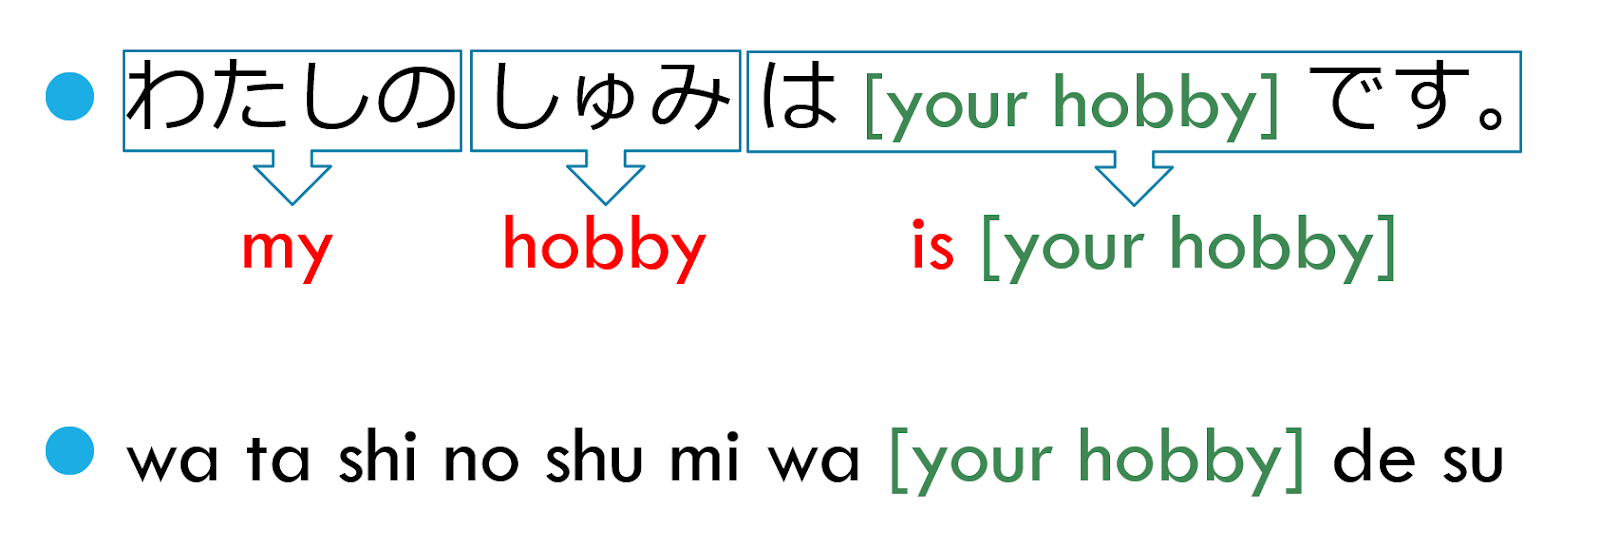 How To Introduce Yourself In Japanese